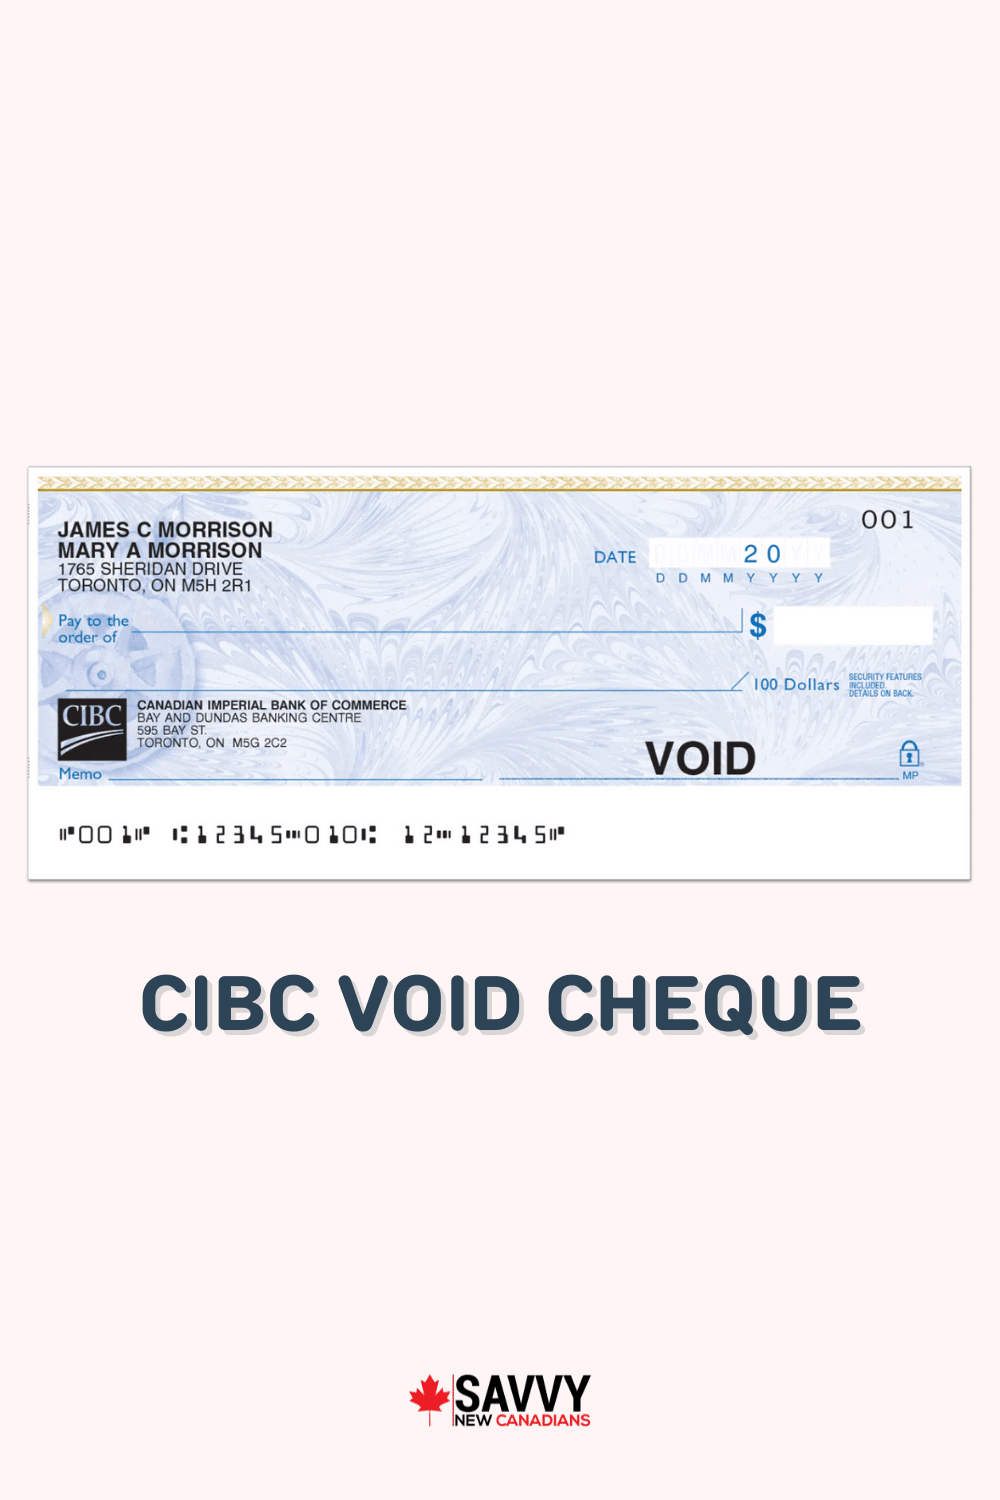 CIBC Void Cheque: How To Read and Get a CIBC Sample Cheque